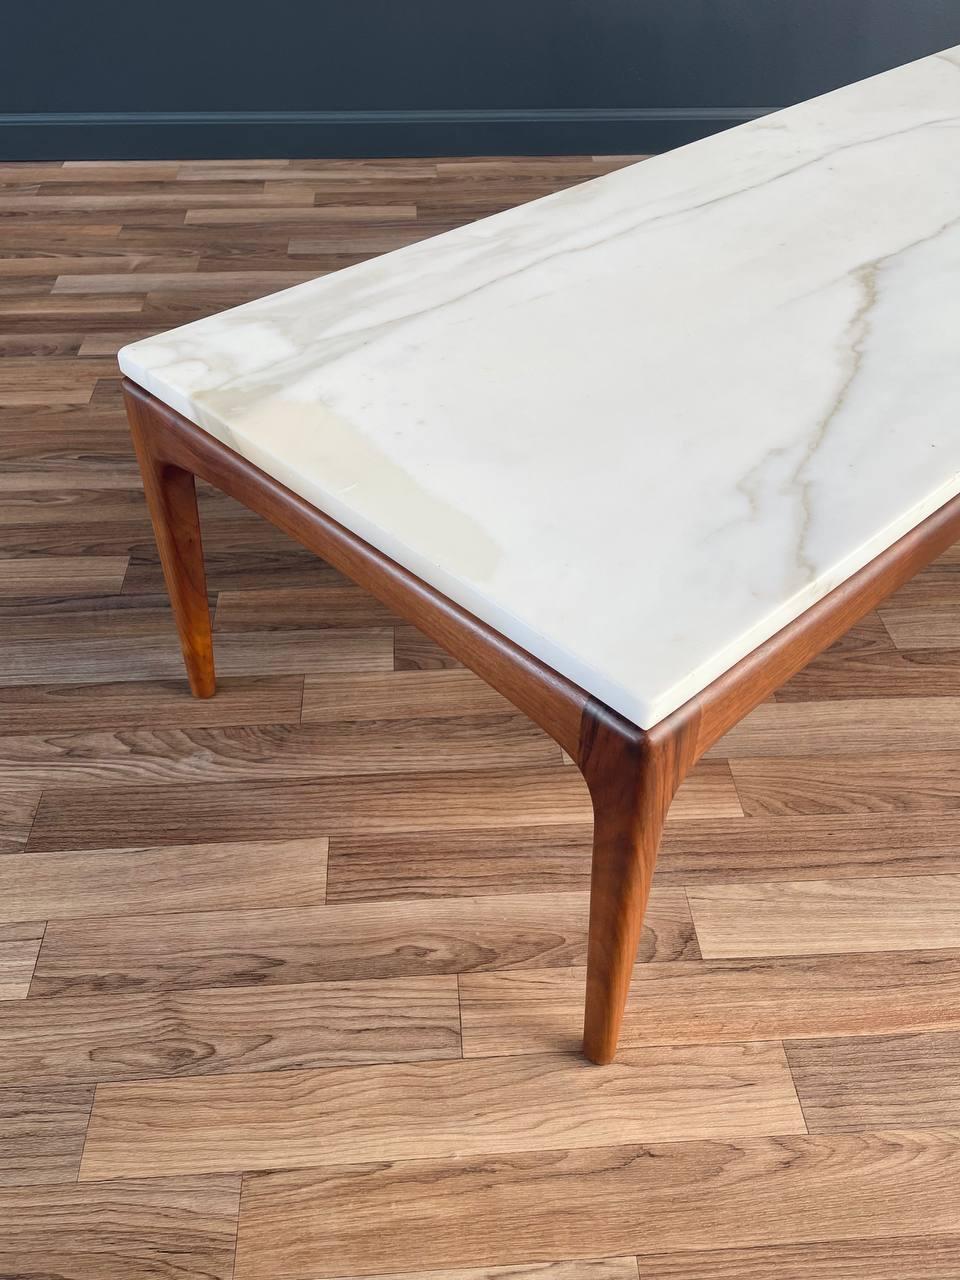 Newly Refinished - Mid-Century Modern Marble & Walnut Coffee Table by Lane 3